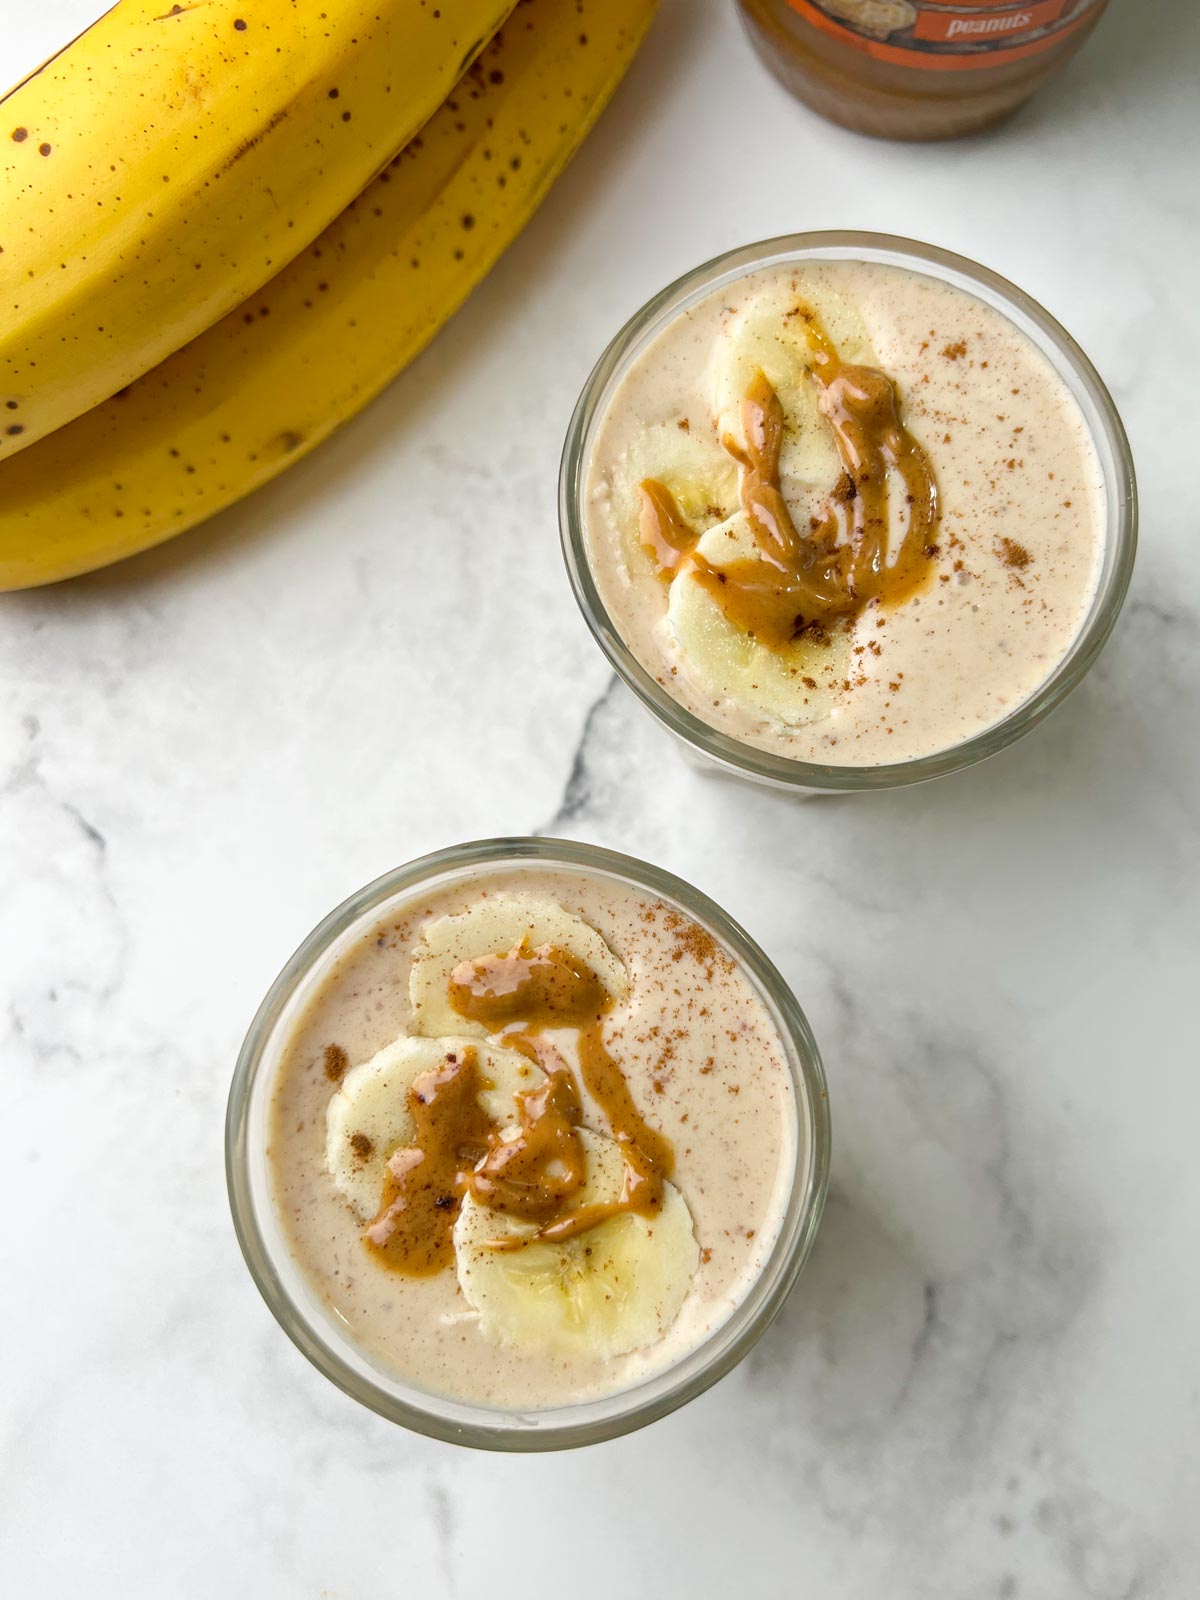 banana peanut butter smoothie served in two glasses toped with banana slices, nut butter and banana on the side